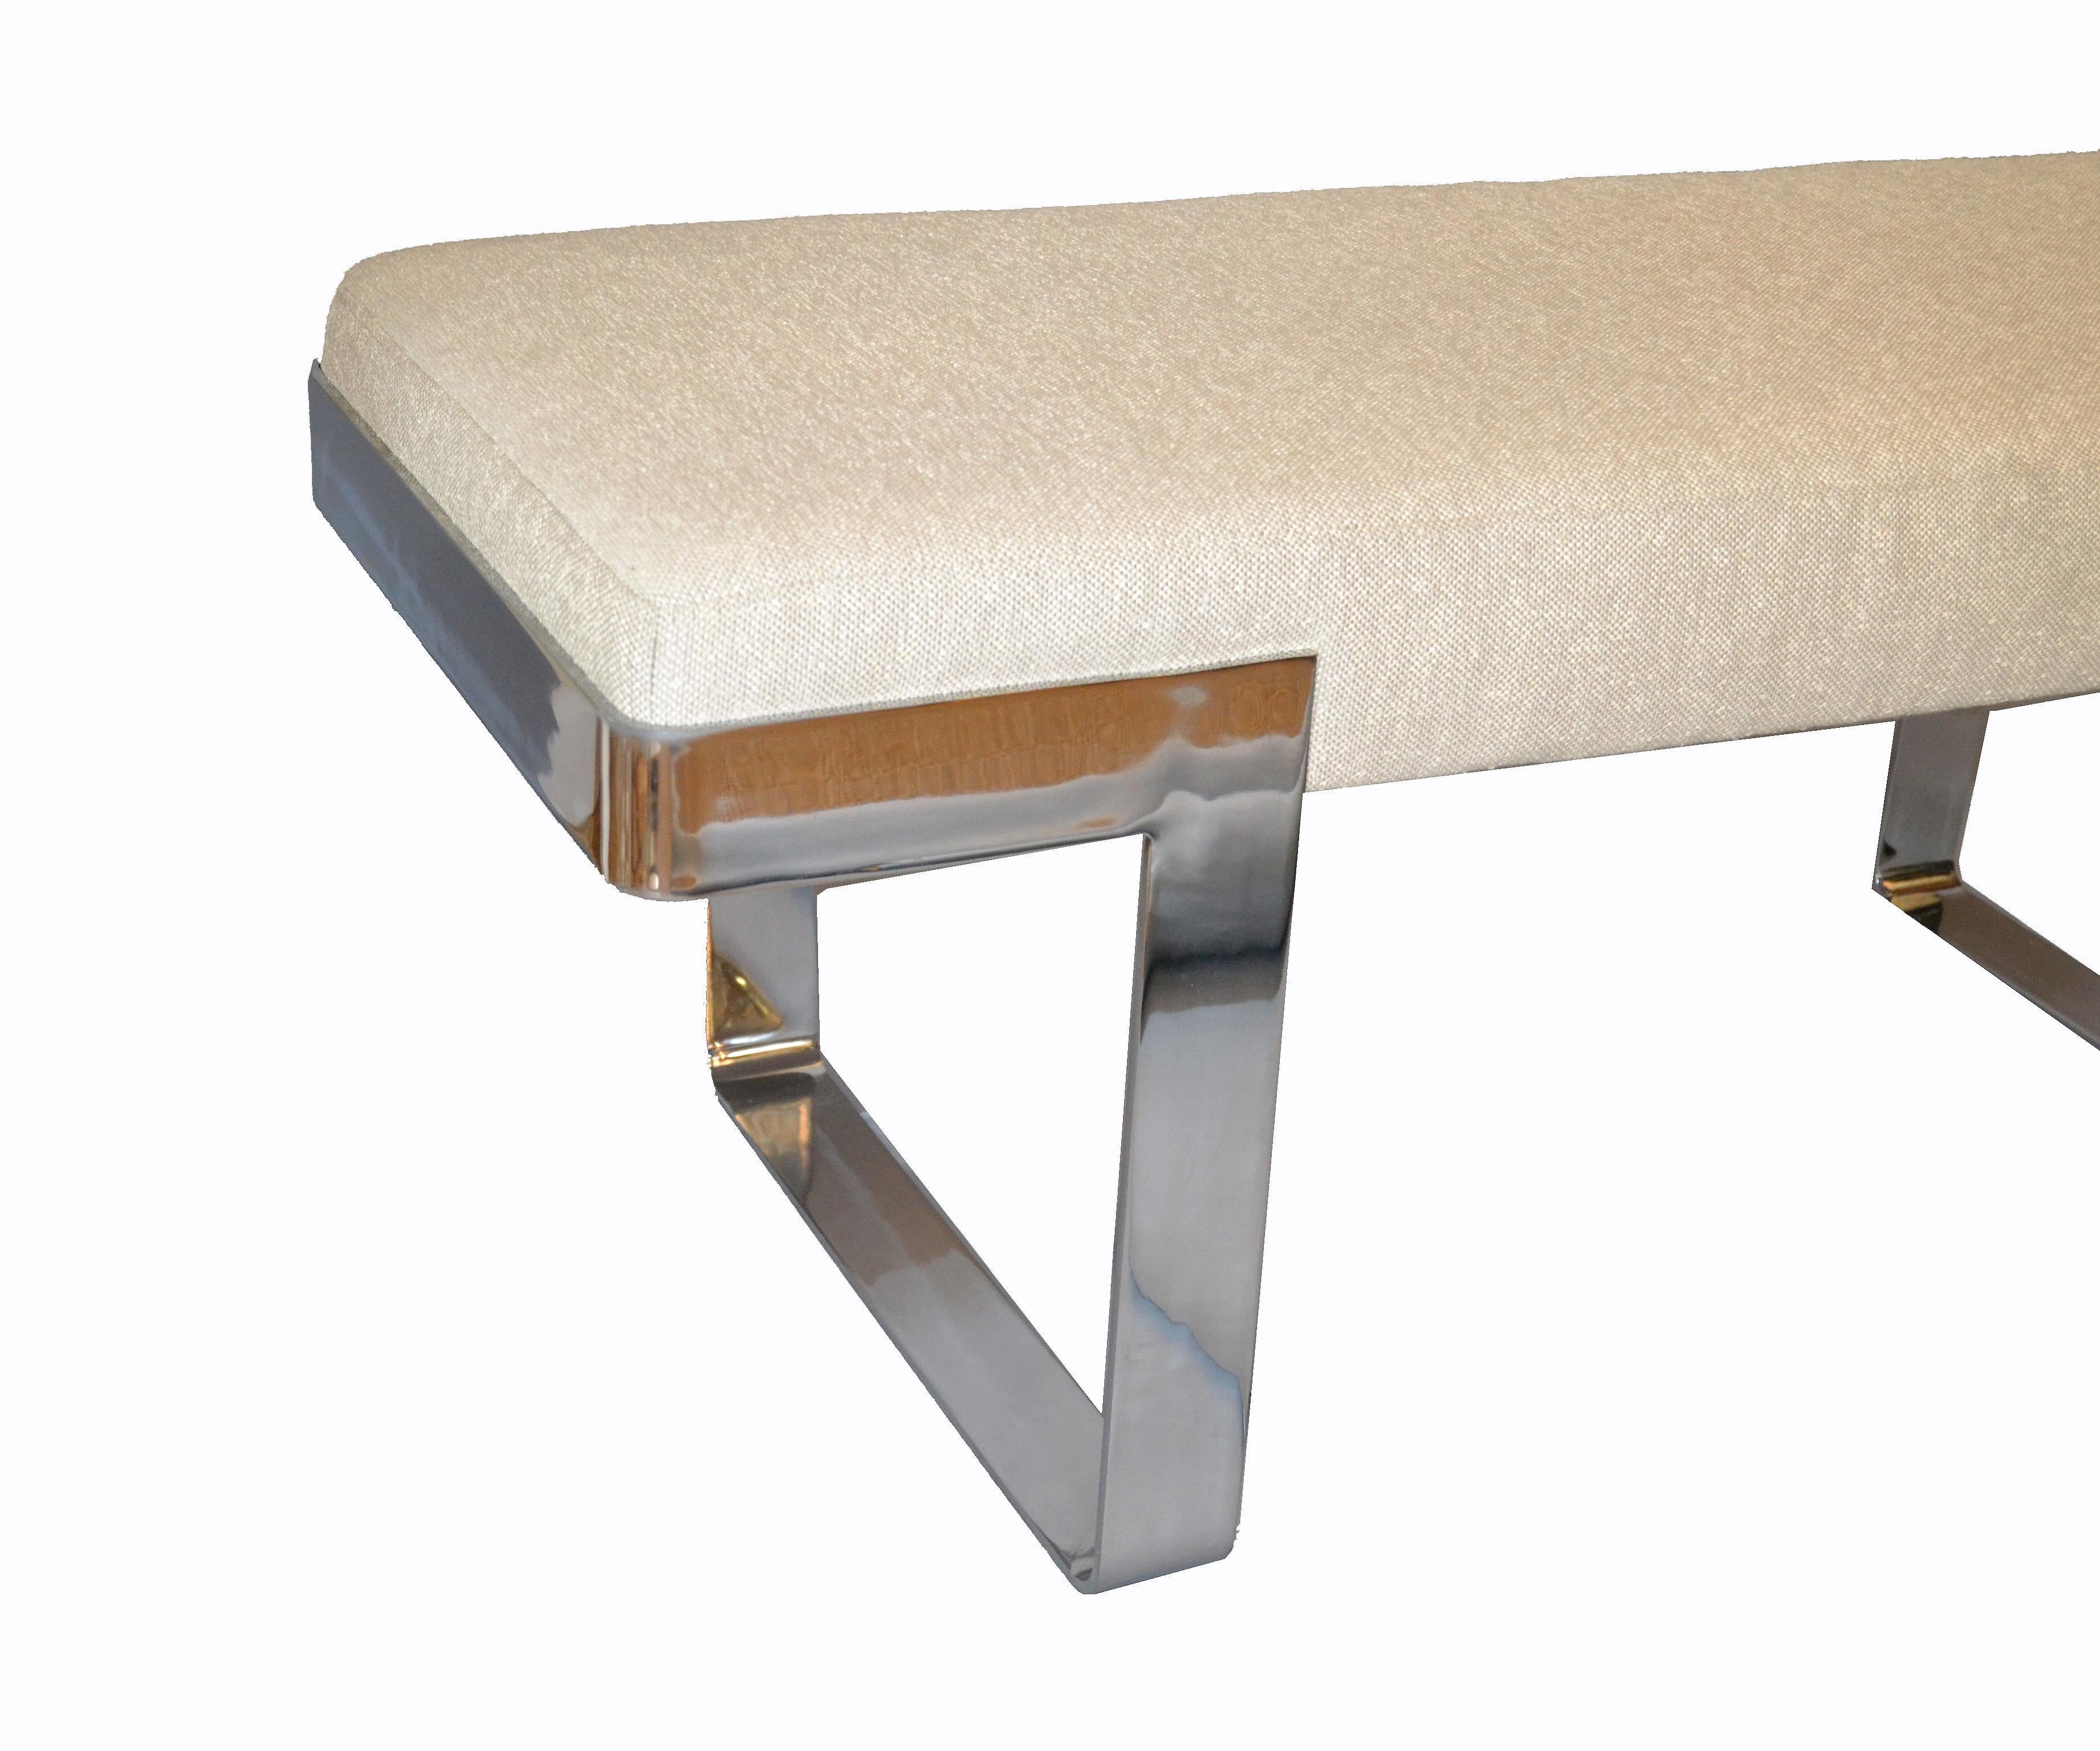 1 of 2 Milo Baughman Benches Linen Fabric in Beige on Steel Base Pace Collection 1